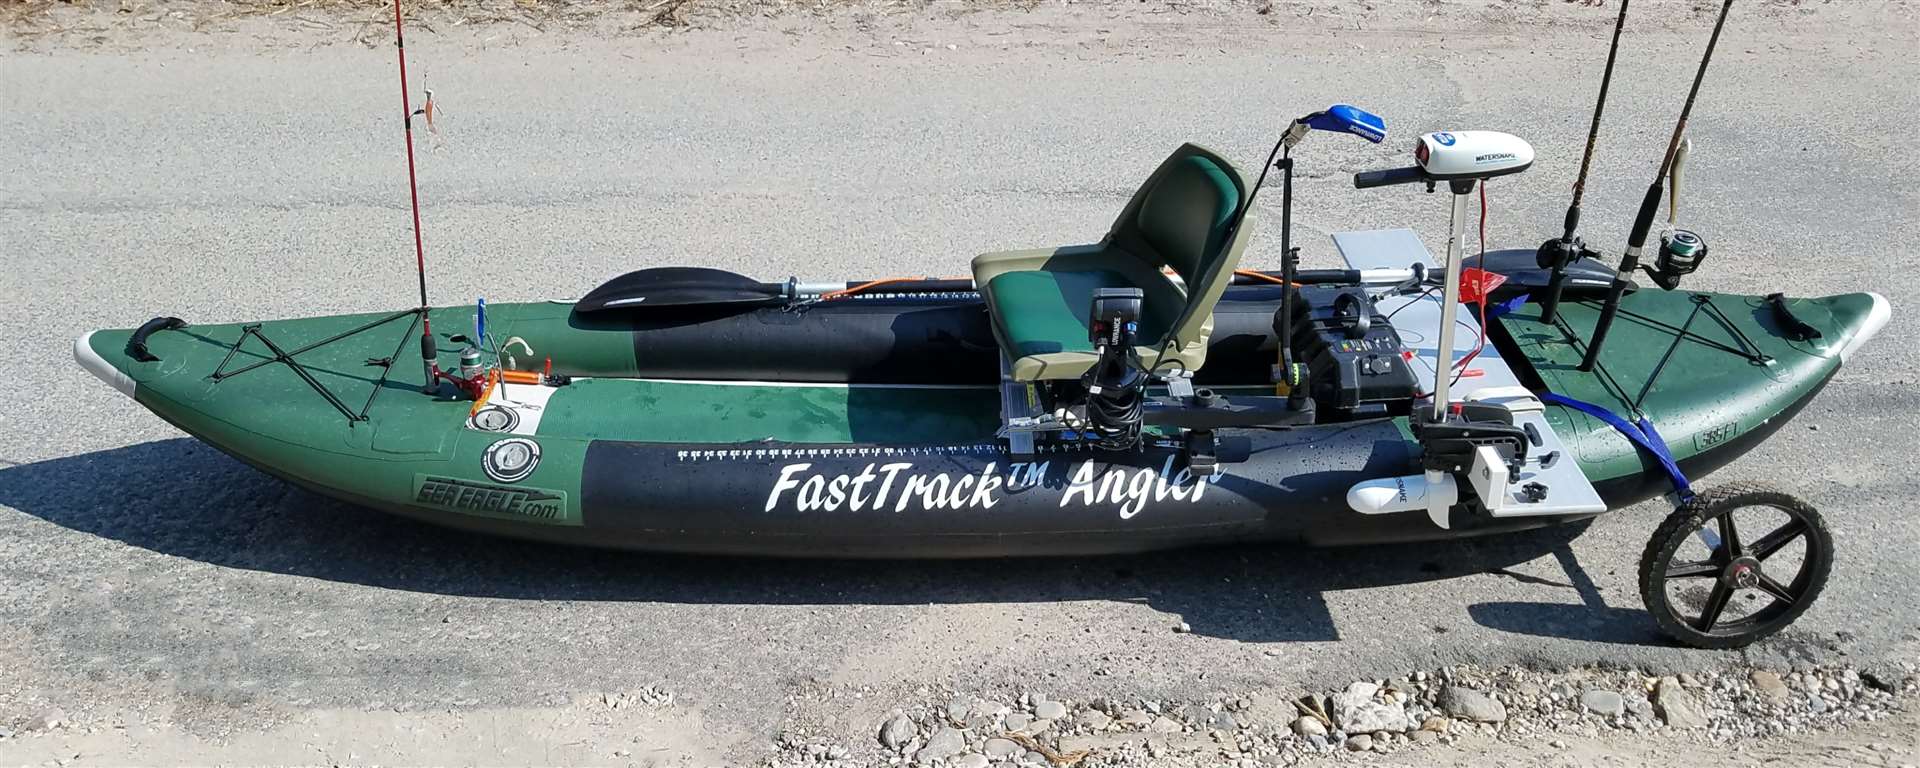 SeaEagle Inflatable Kayak Sea Eagle - 385FTA 3 Person 12'6" Green FastTrack Angler Inflatable Angler Pro Fishing Boat Package ( 385FTAK_P )